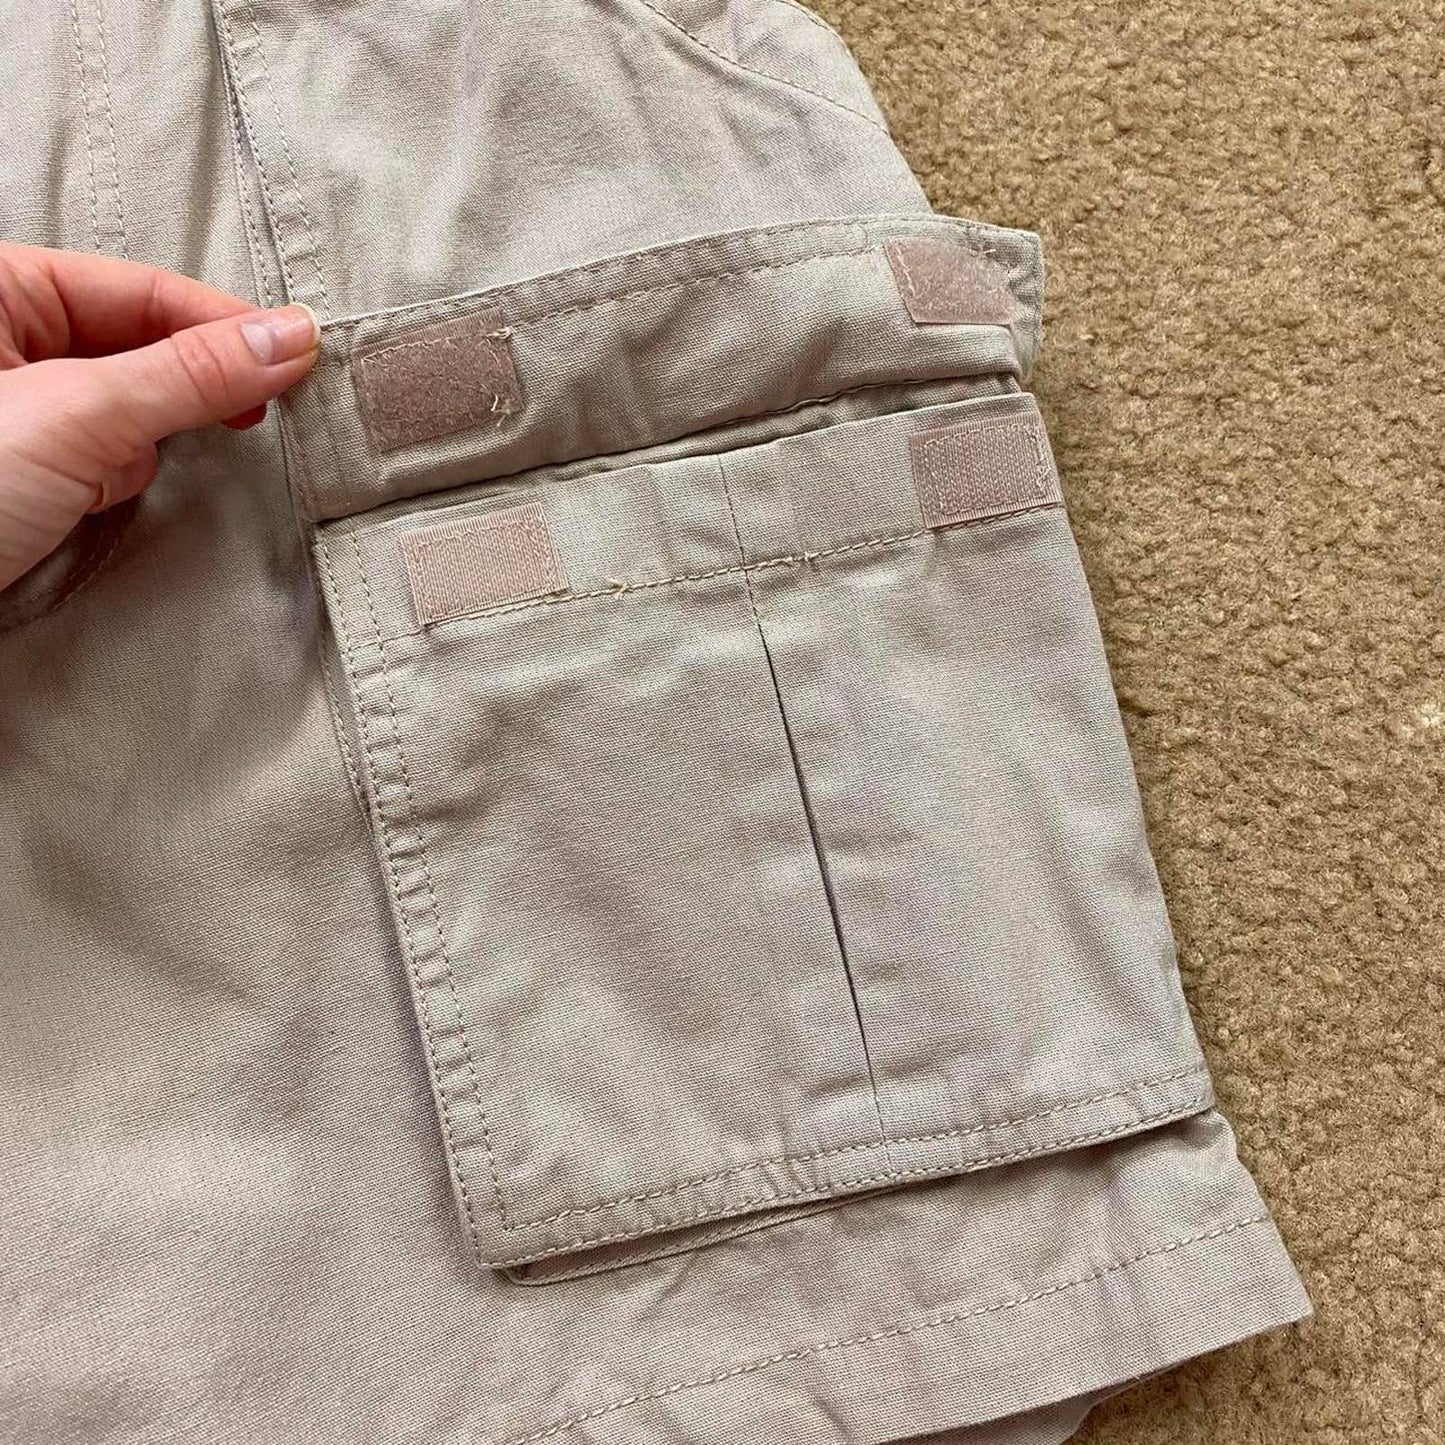 Secondhand Tan Utility Cargo Shorts, Size Small